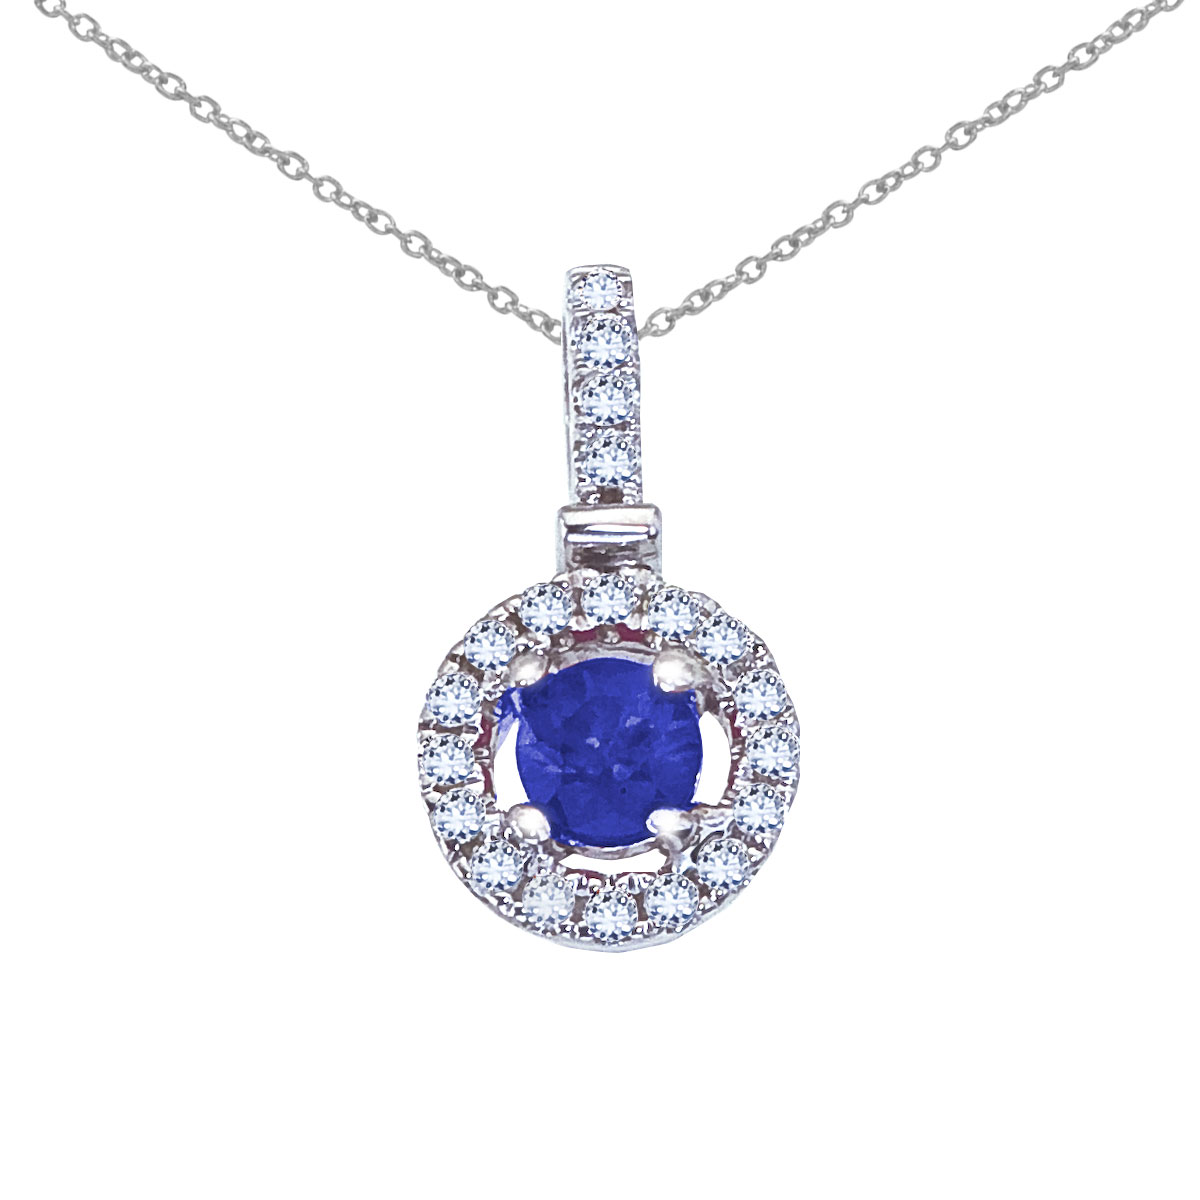 JCX2558: A stunning 3.8 mm sapphire surrounded .12 total ct diamonds set in a bright 14k white gold pendant.